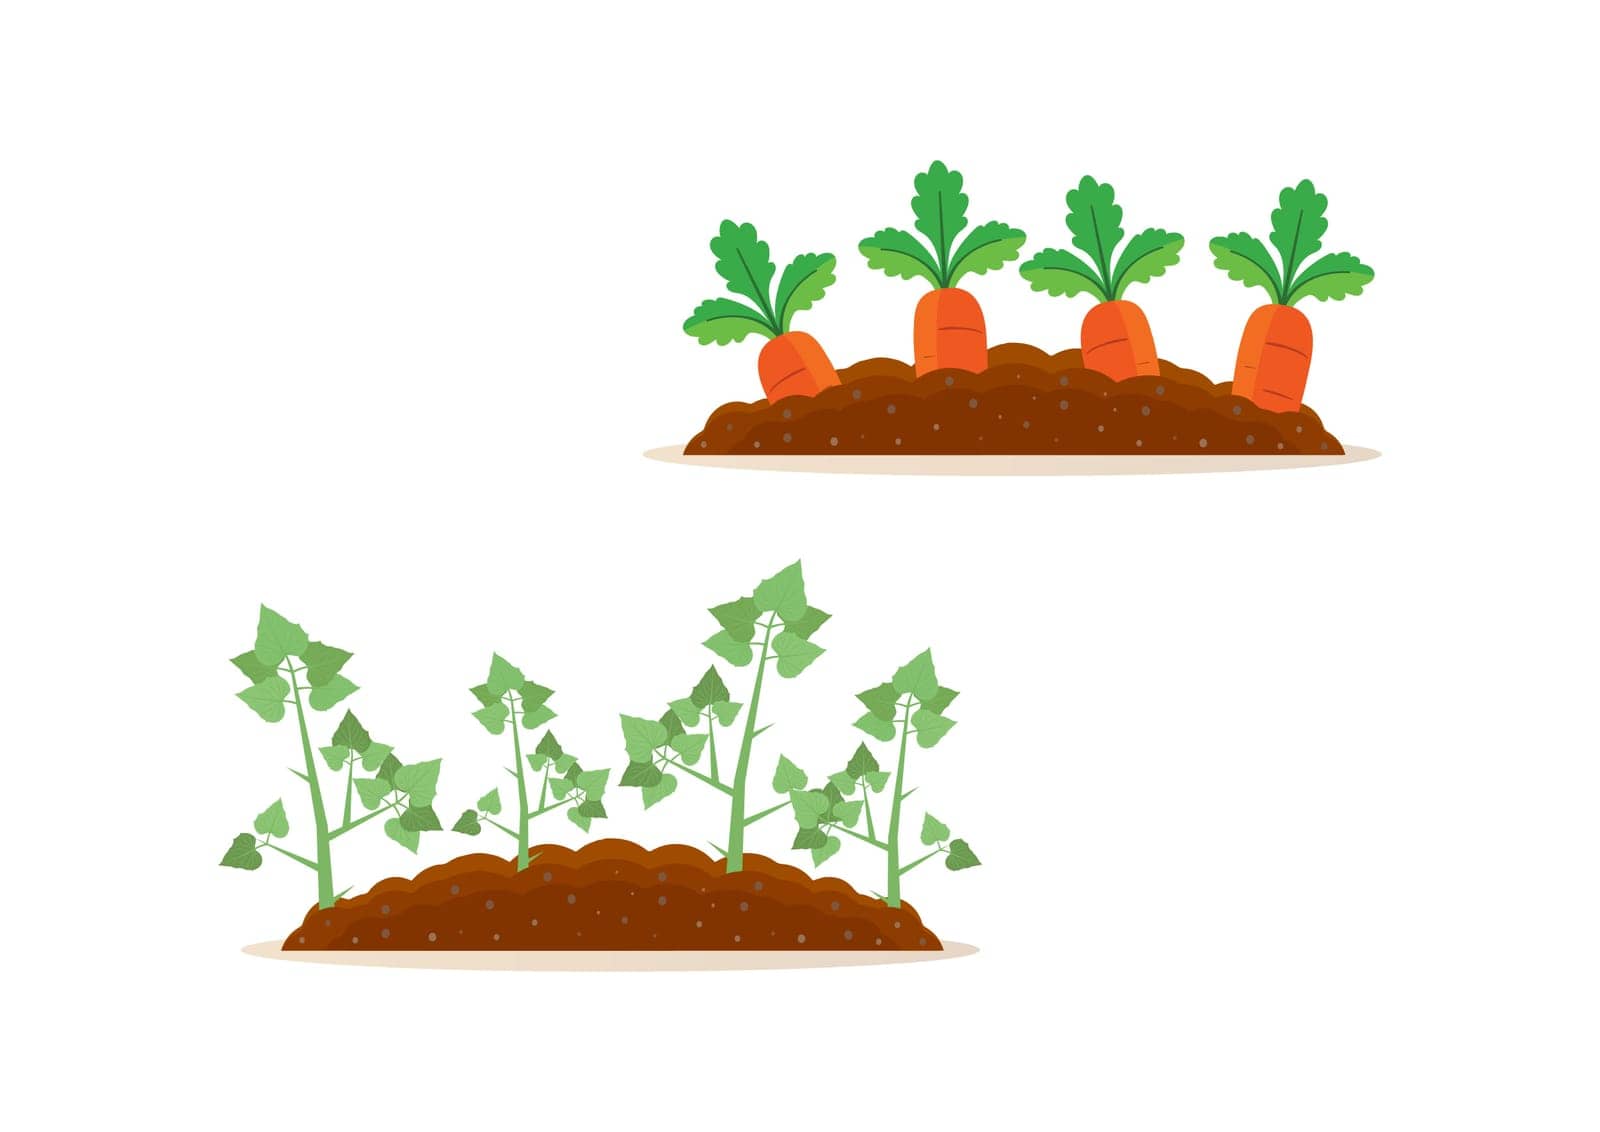 Potato and carrot harvest clipart by mihaigr10